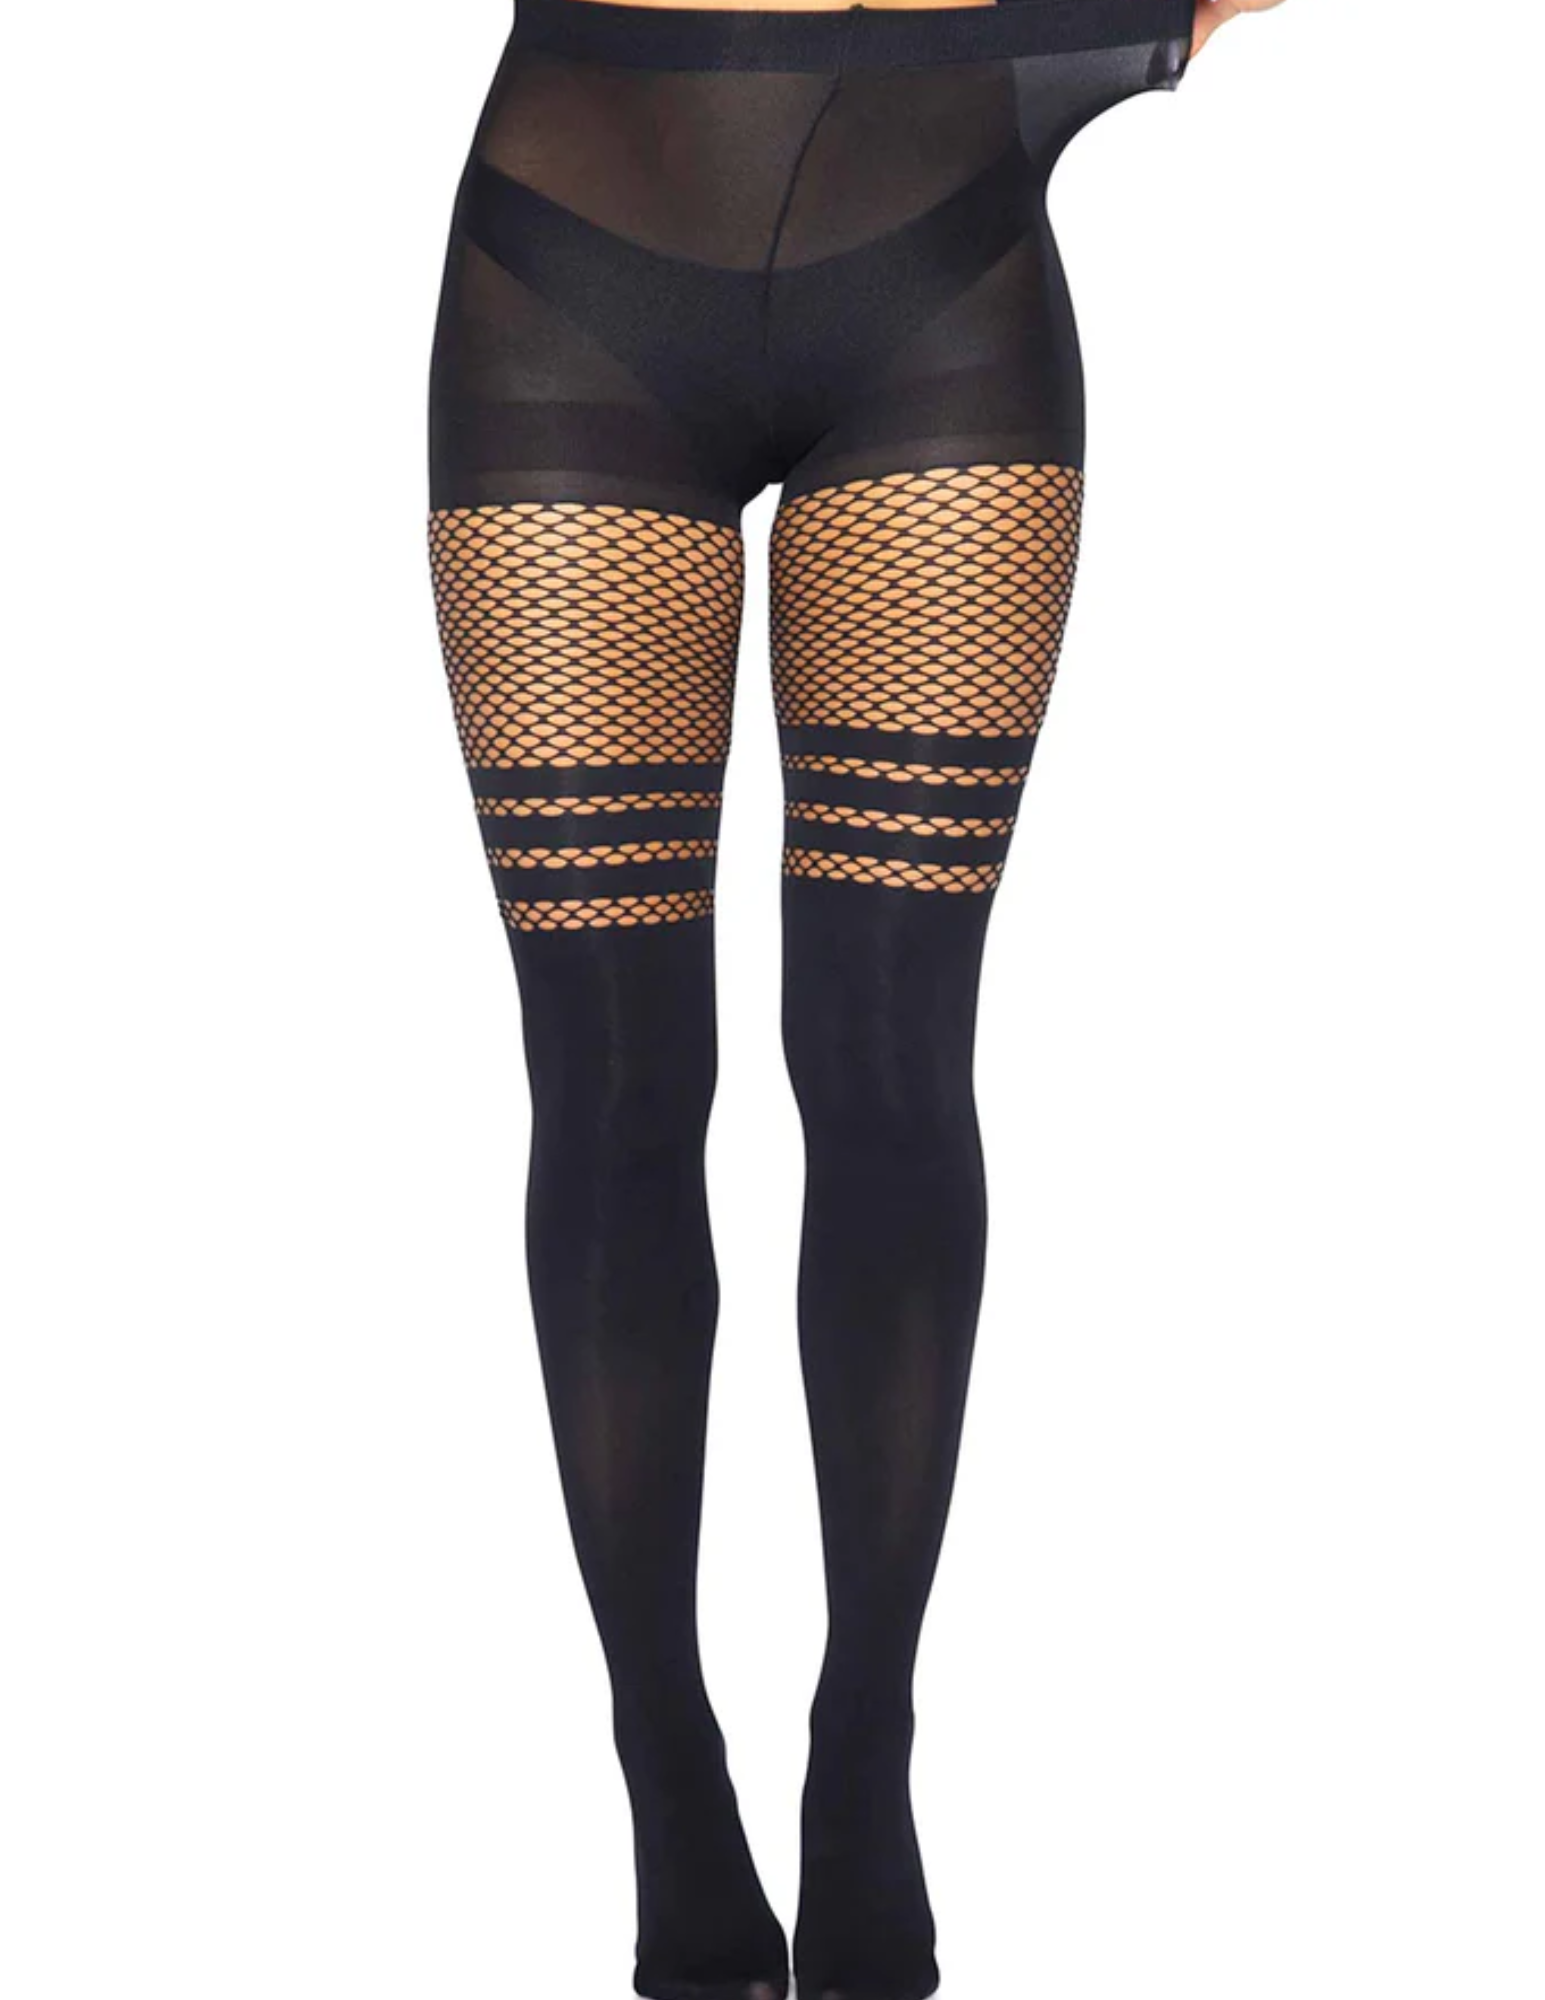 Photo shows the stretch of the waist on the Opaque Thigh High w/ Stripes by Leg Avenue (black, OS).